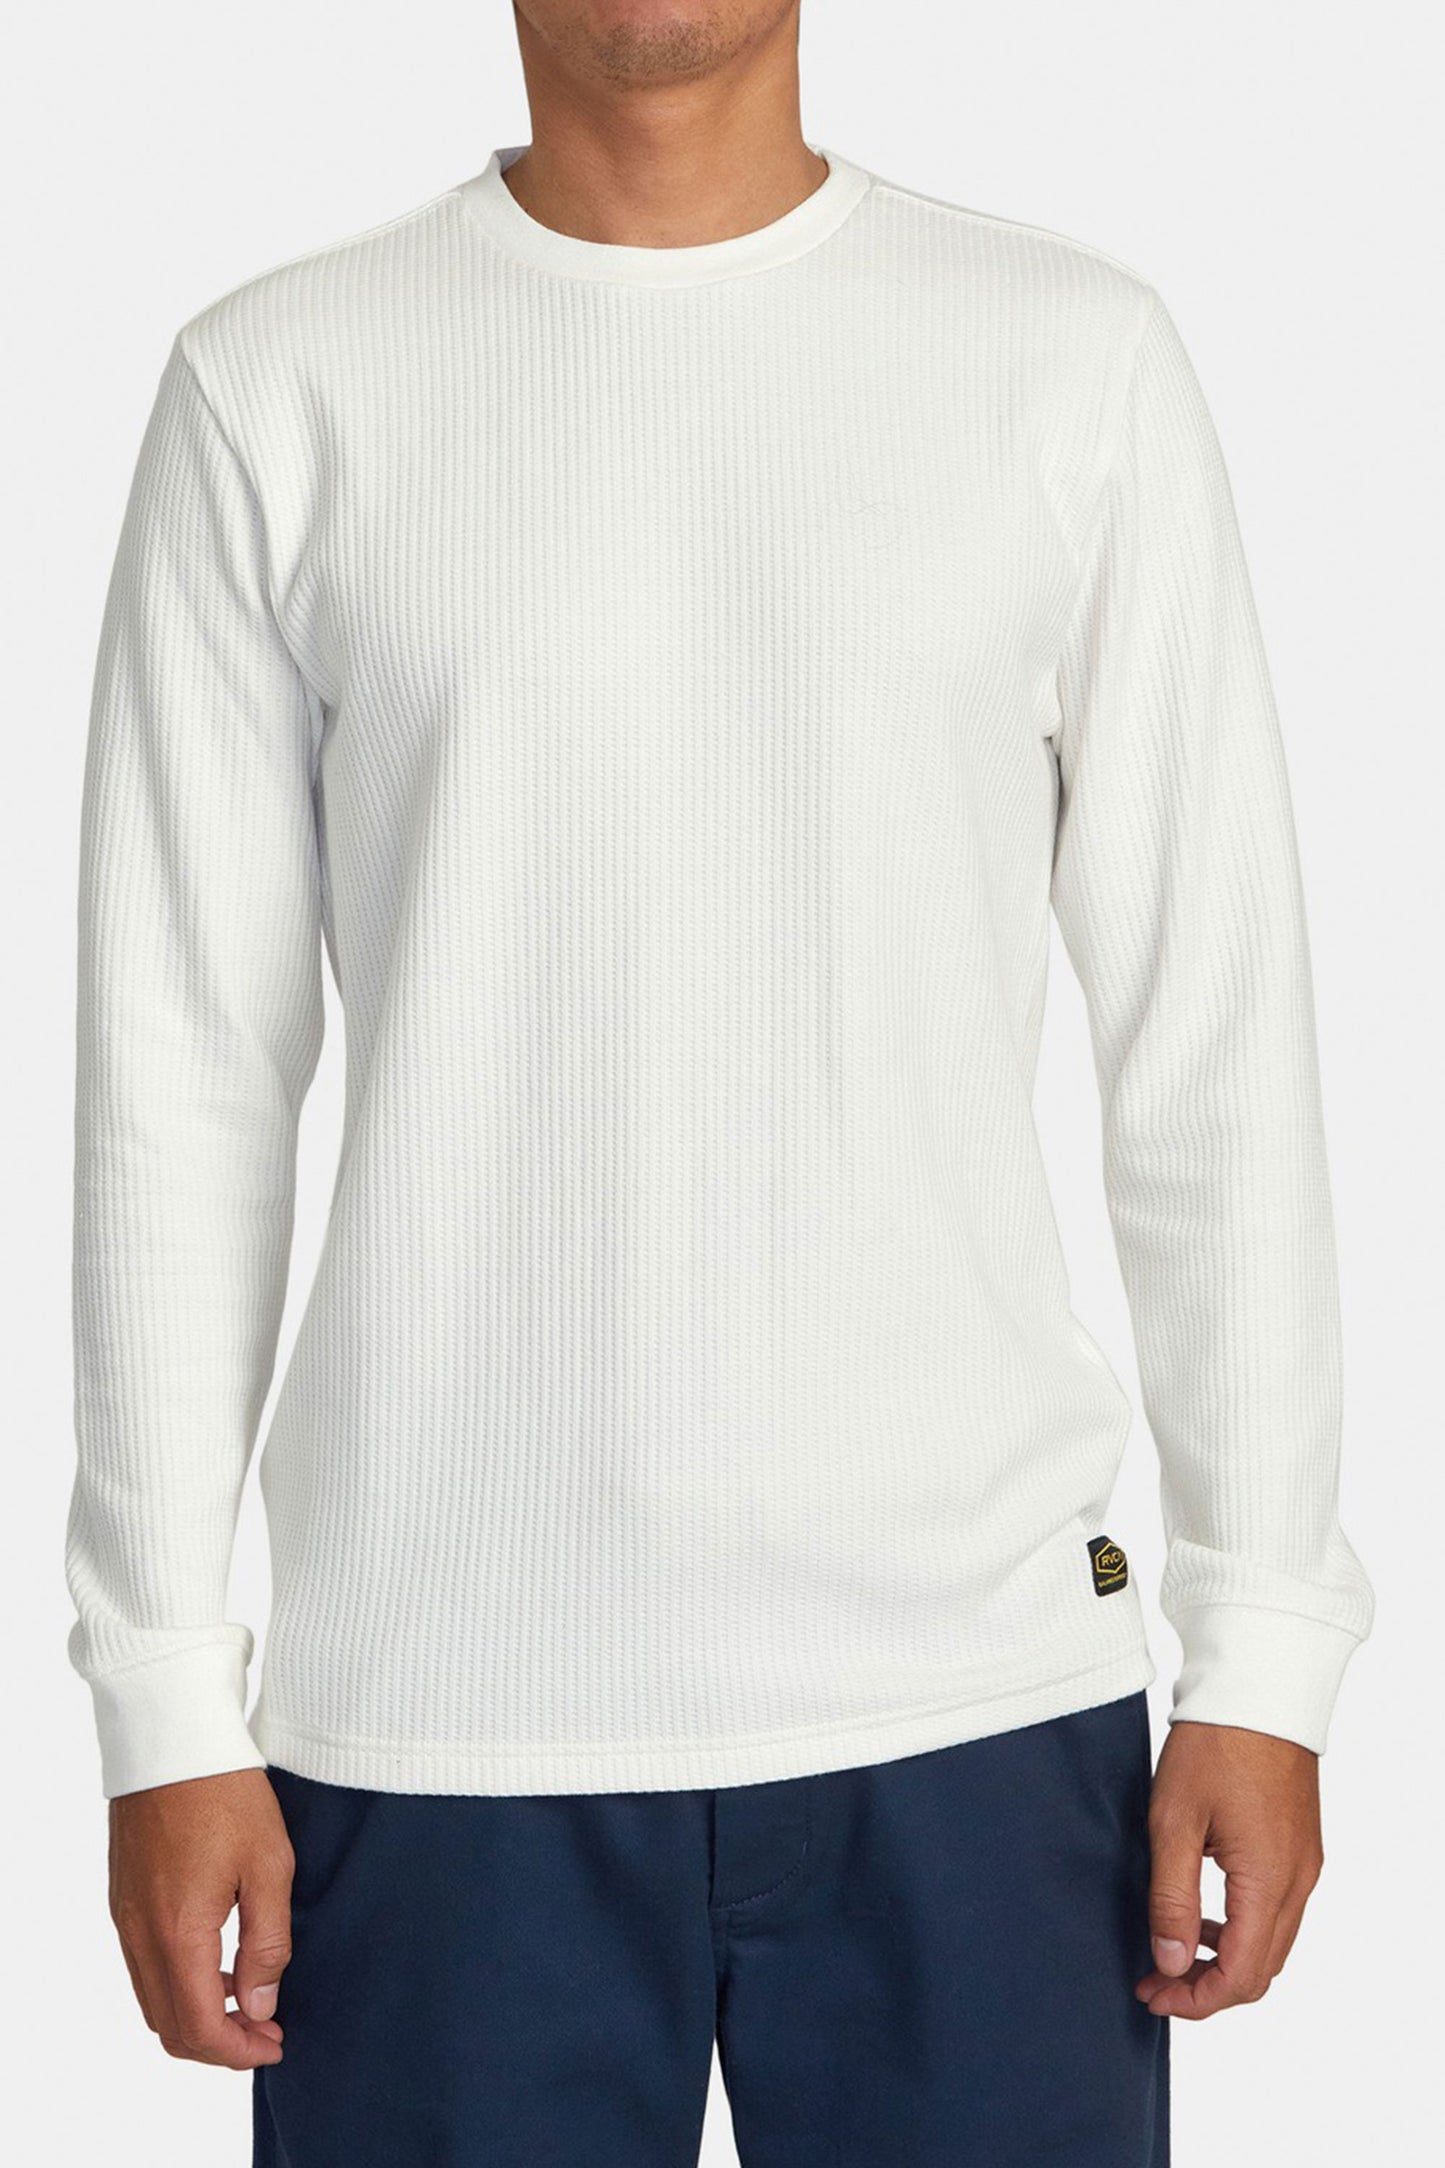    Pukas-Surf-Shop-RVCA-Sweater-Day-Shift-Thermal-Off-White